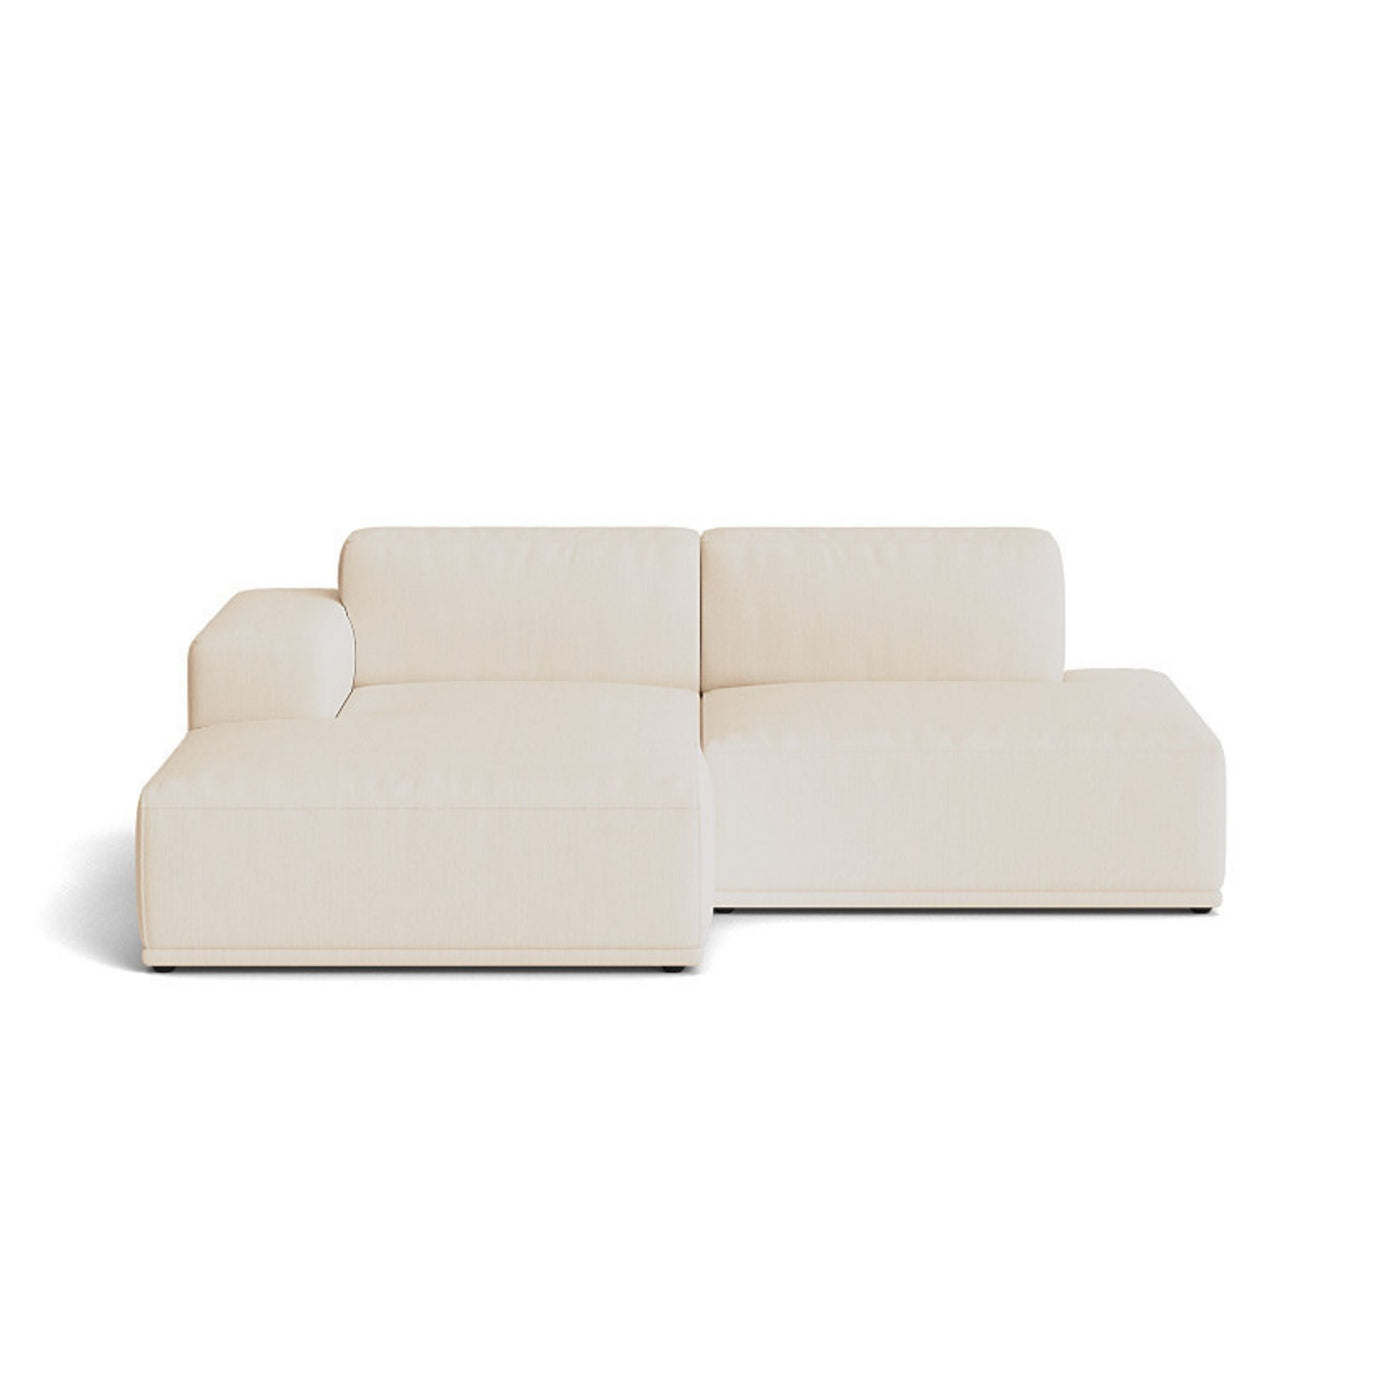 Muuto Connect Soft Modular 2 Seater Sofa, configuration 3. made-to-order from someday designs. #colour_balder-212